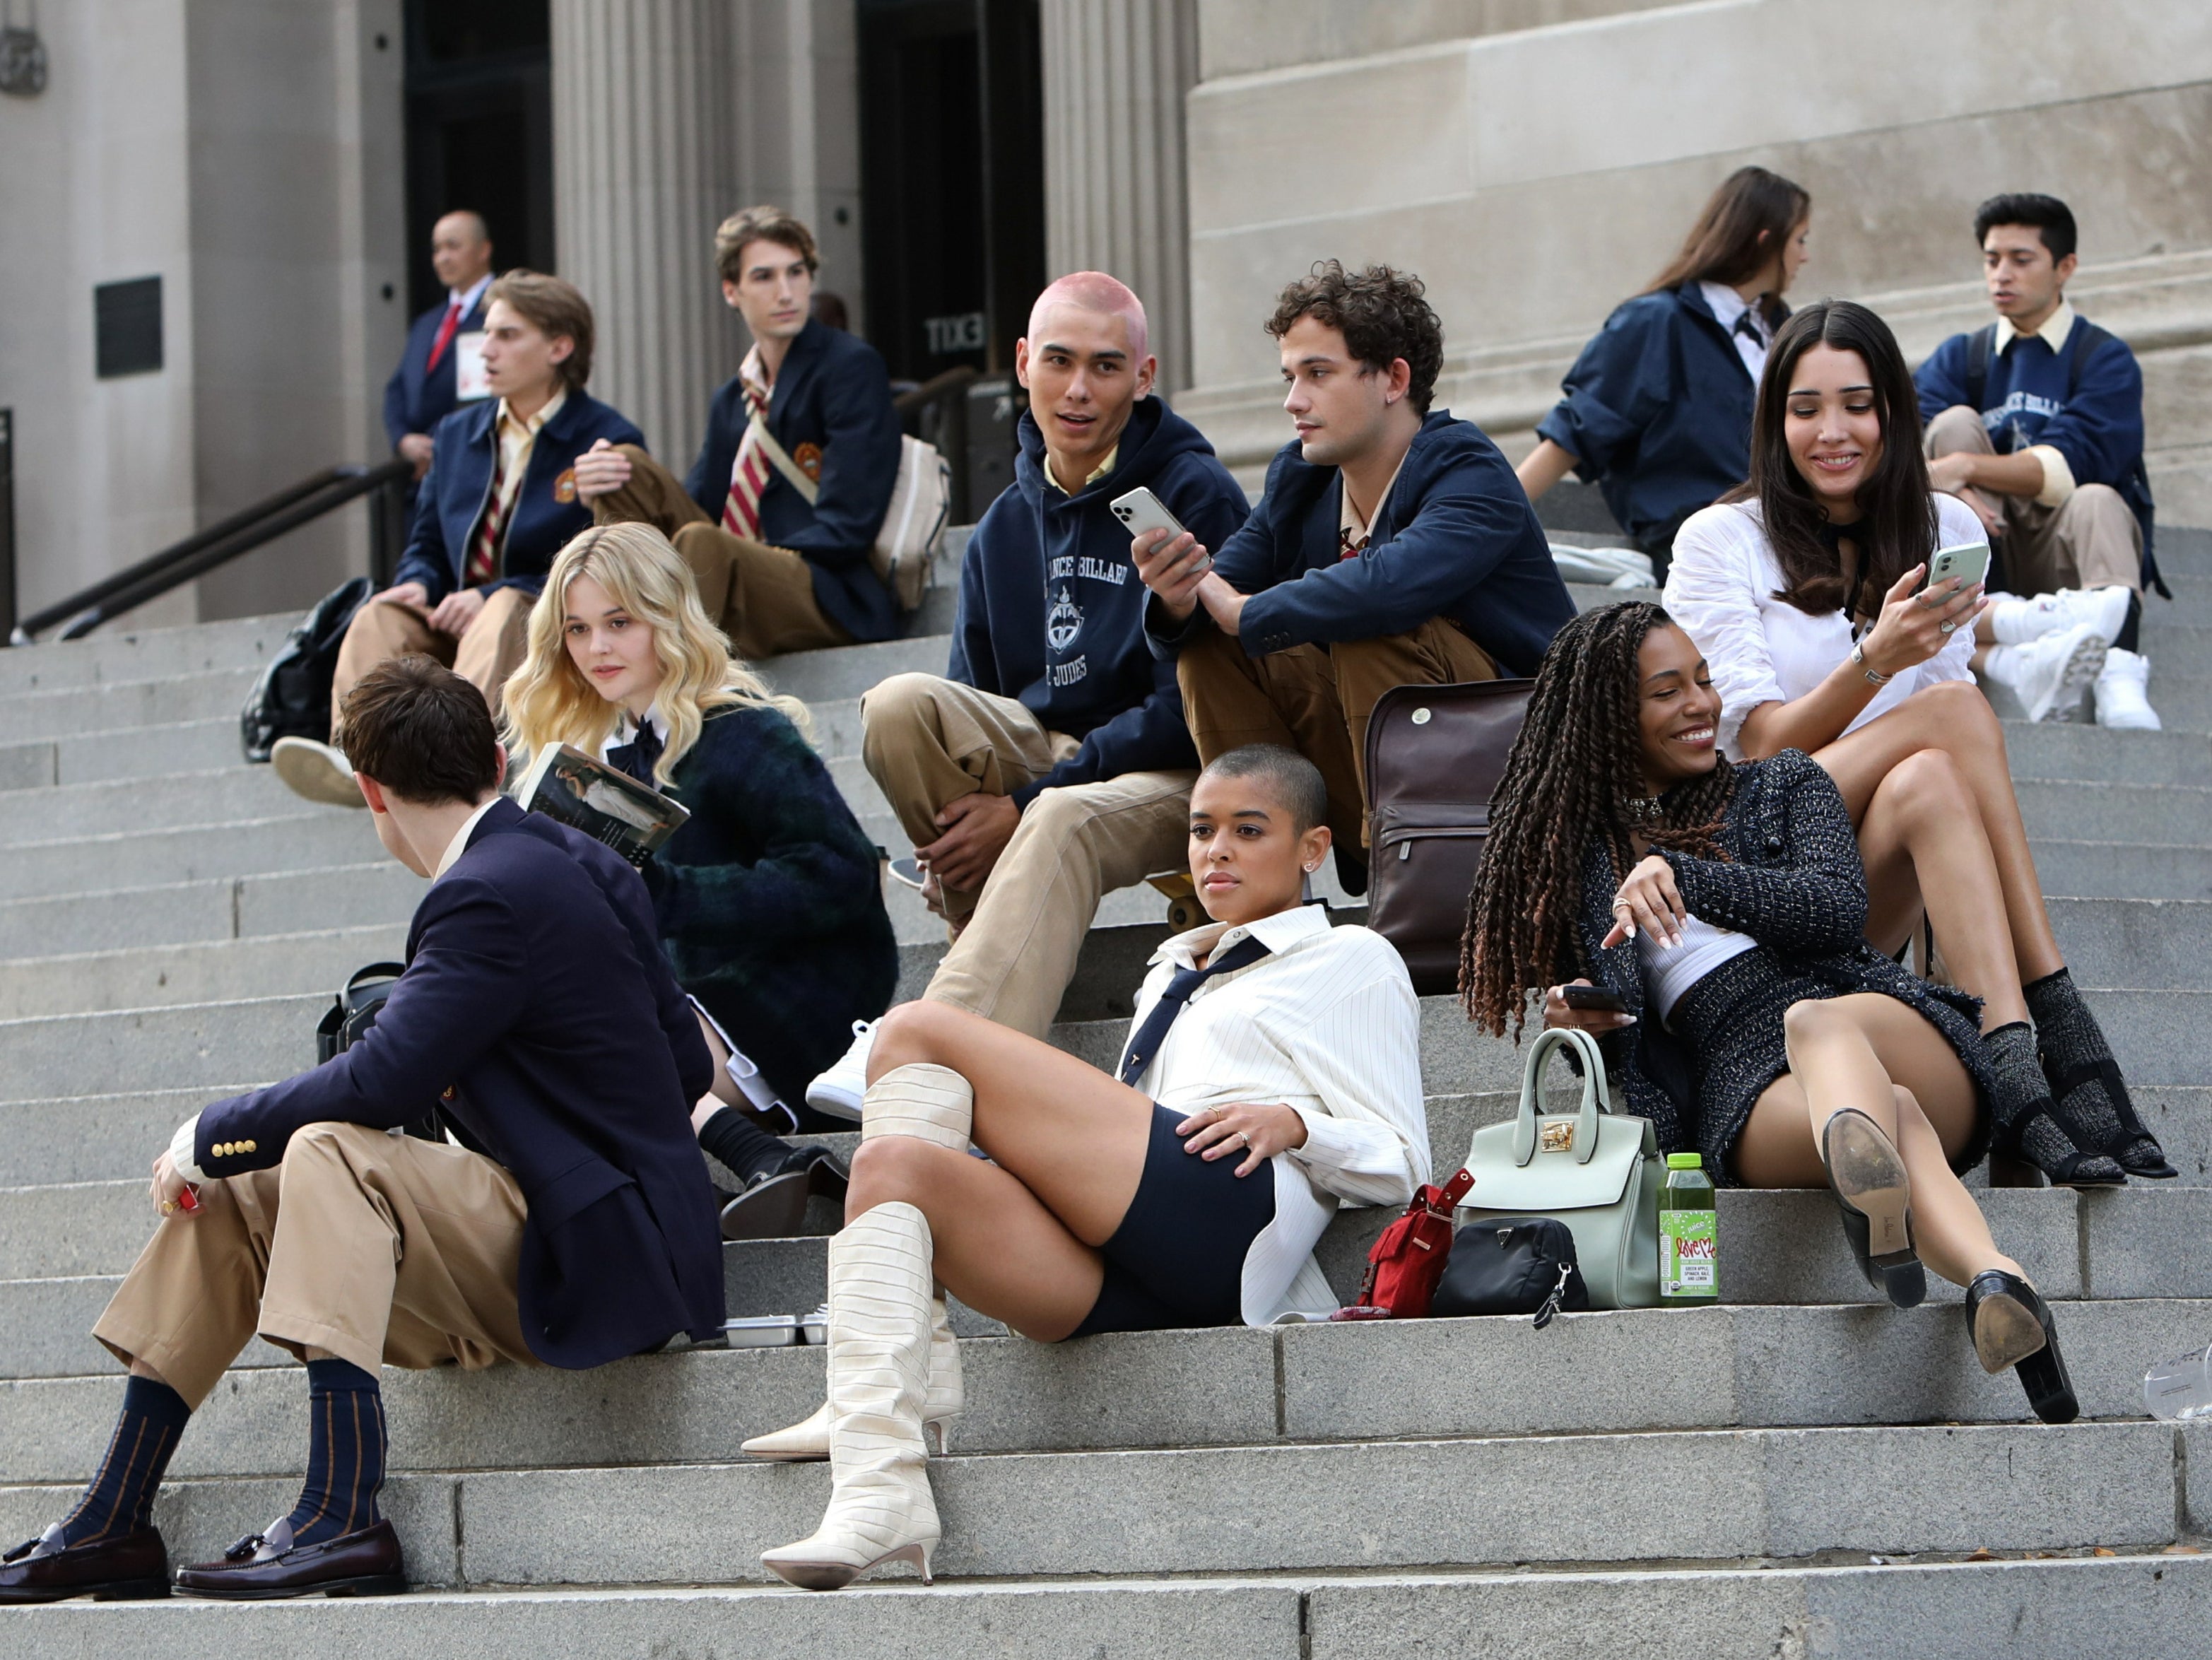 Buzzcuts and tweed: Behind the scenes images of Gossip Girl reboot offers  glimpse at fashion looks